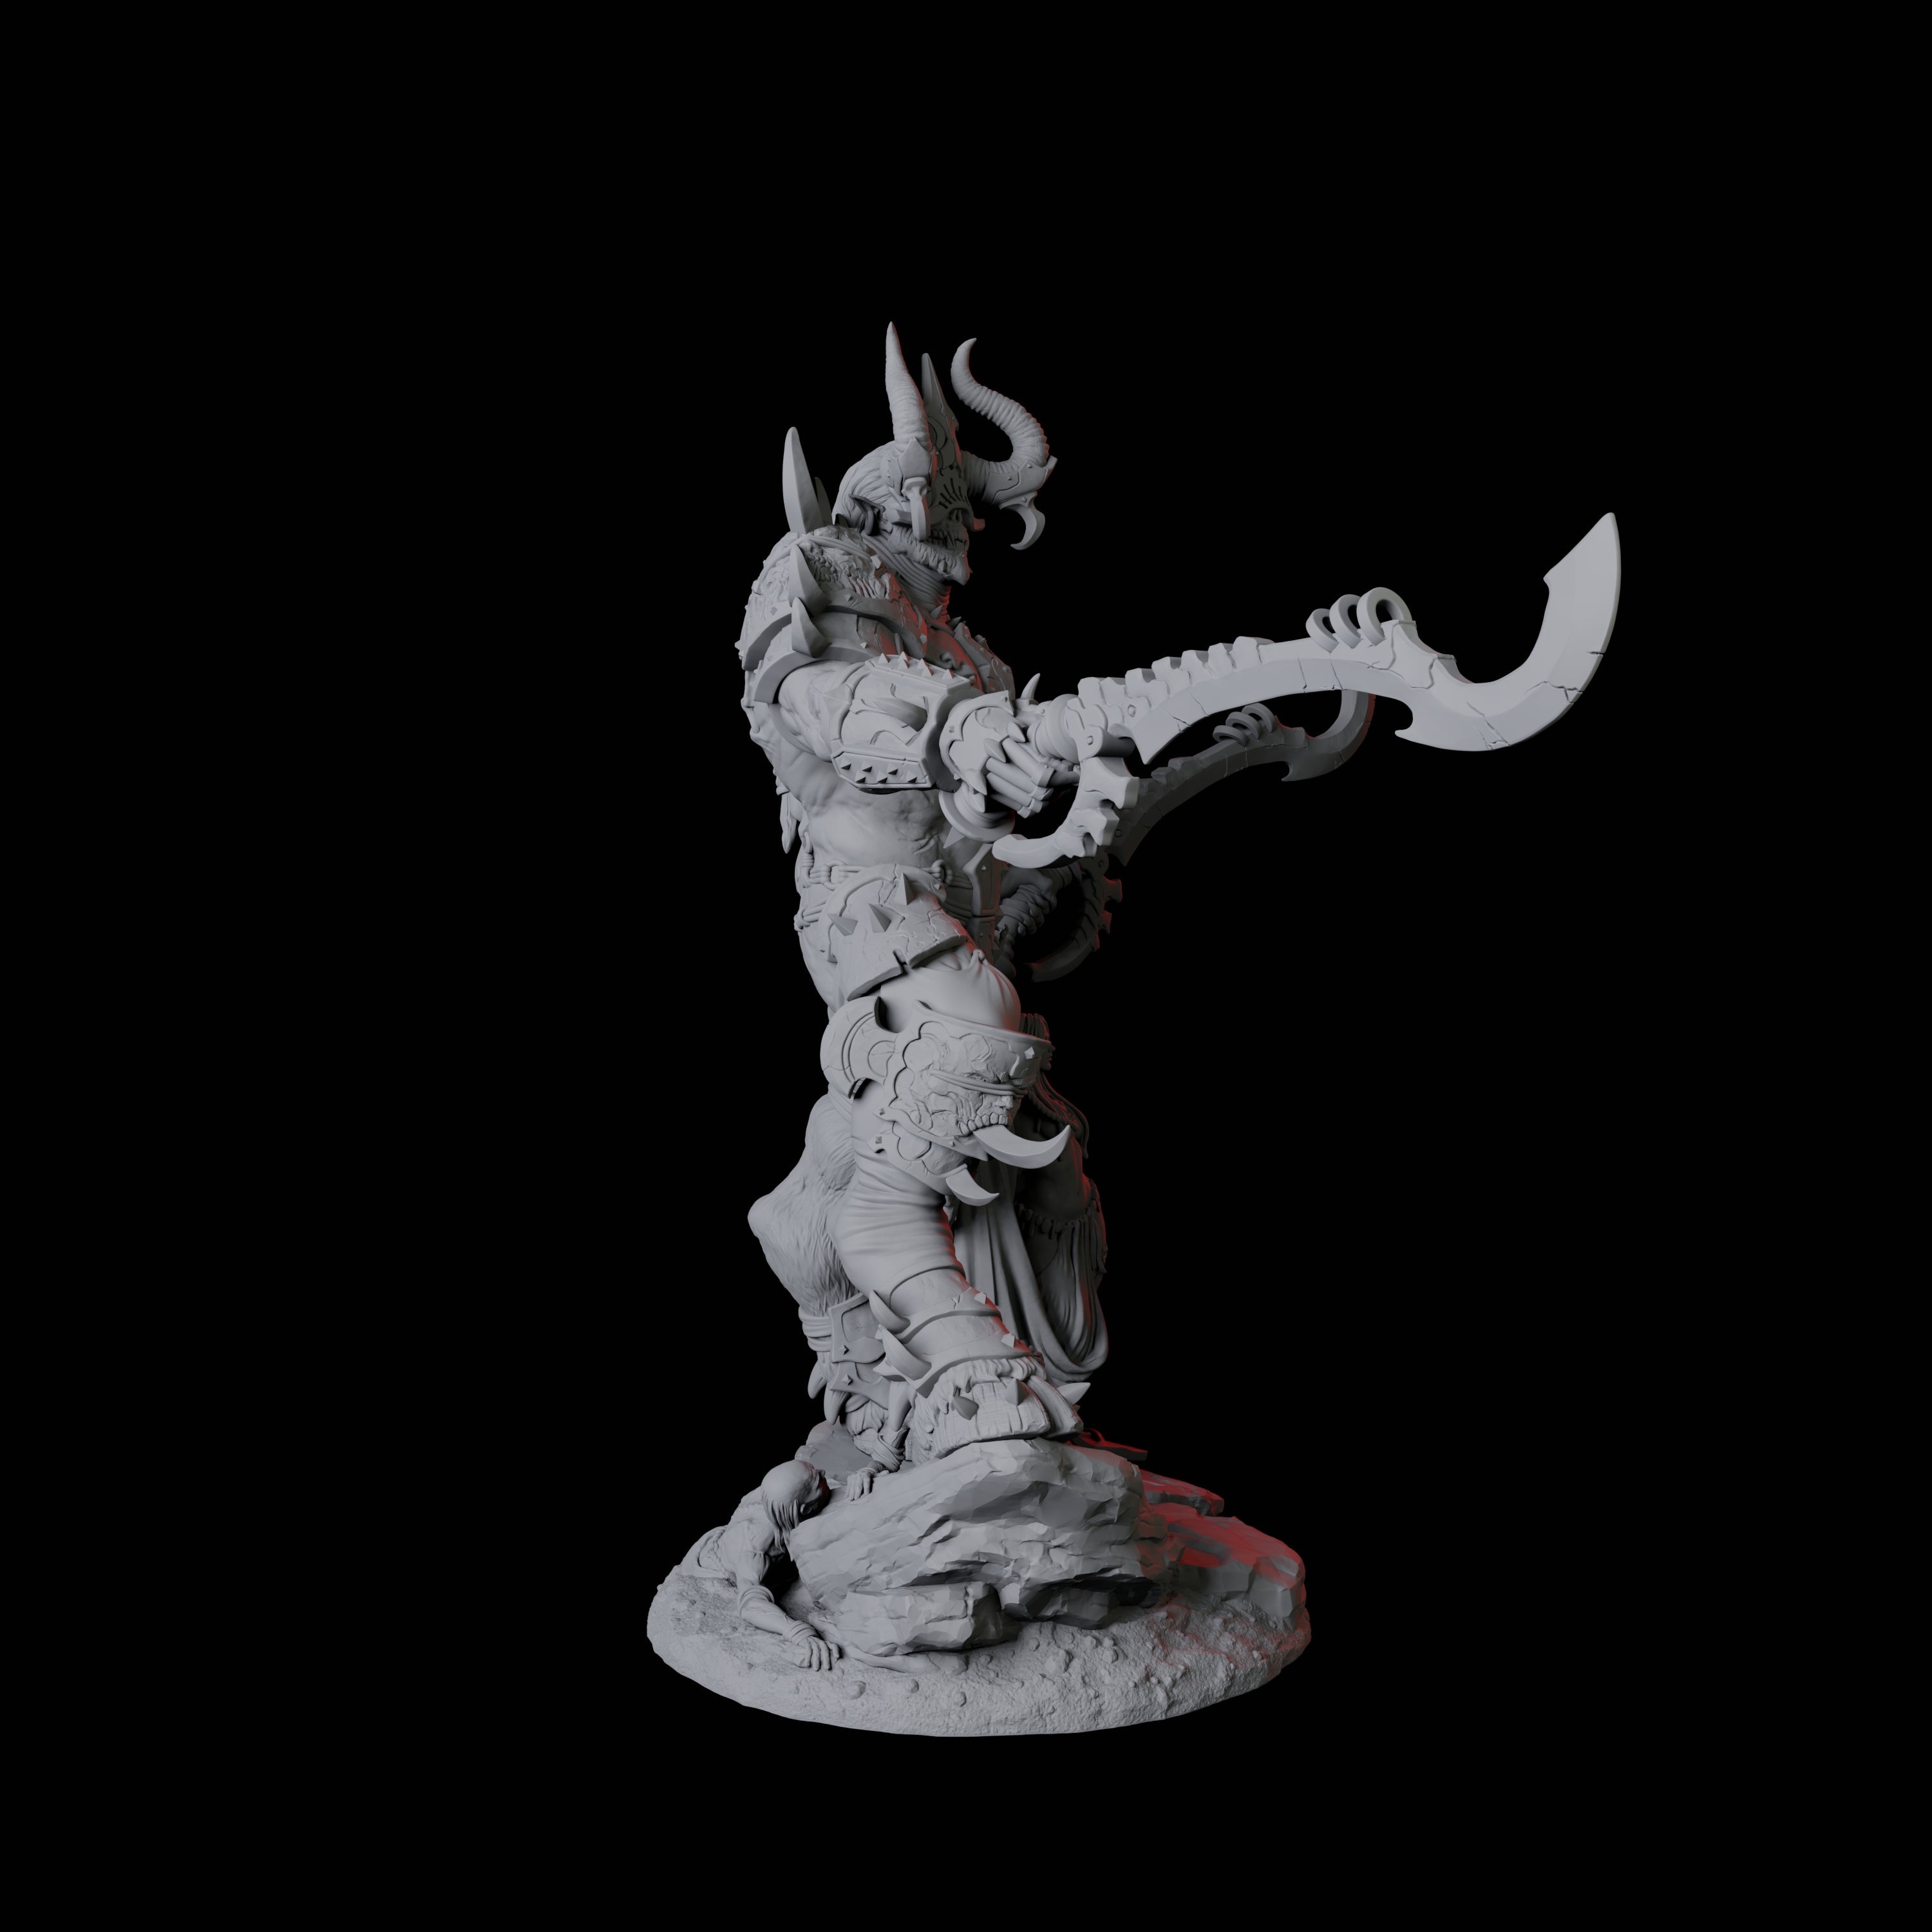 Four Seduced Bearded Devil Champions Miniature for Dungeons and Dragons, Pathfinder or other TTRPGs